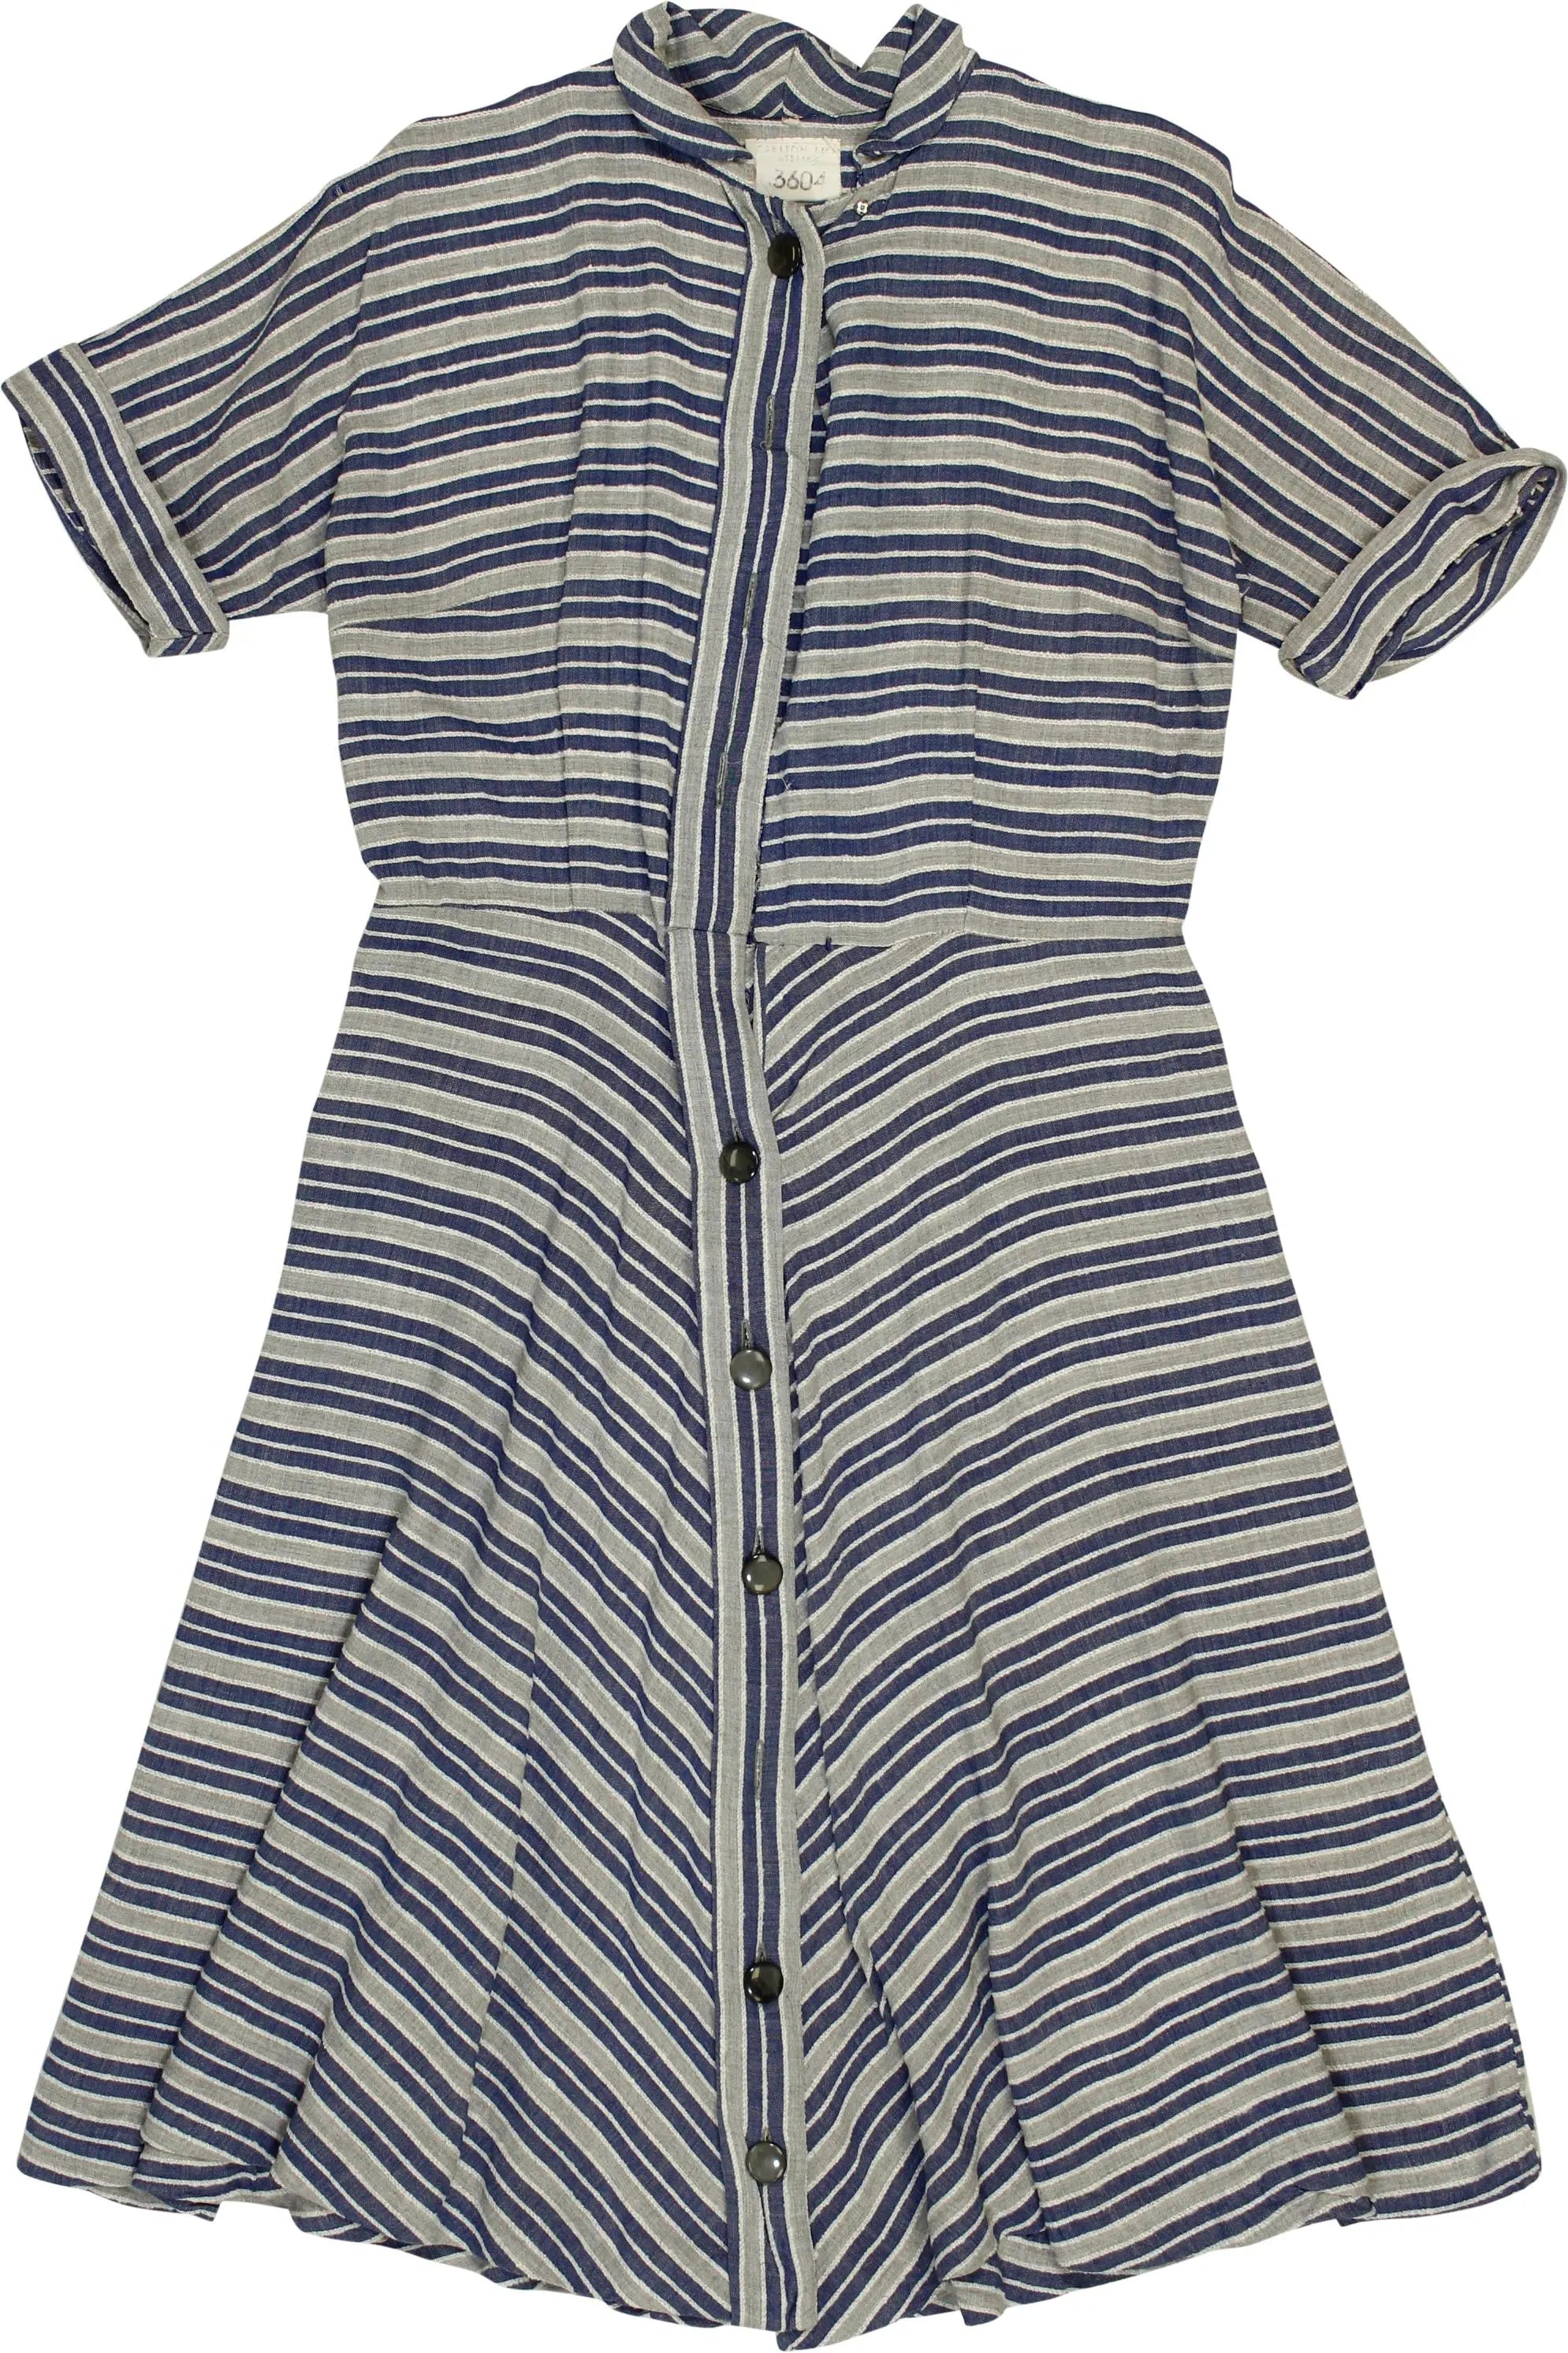 Unknown - Striped Dress- ThriftTale.com - Vintage and second handclothing